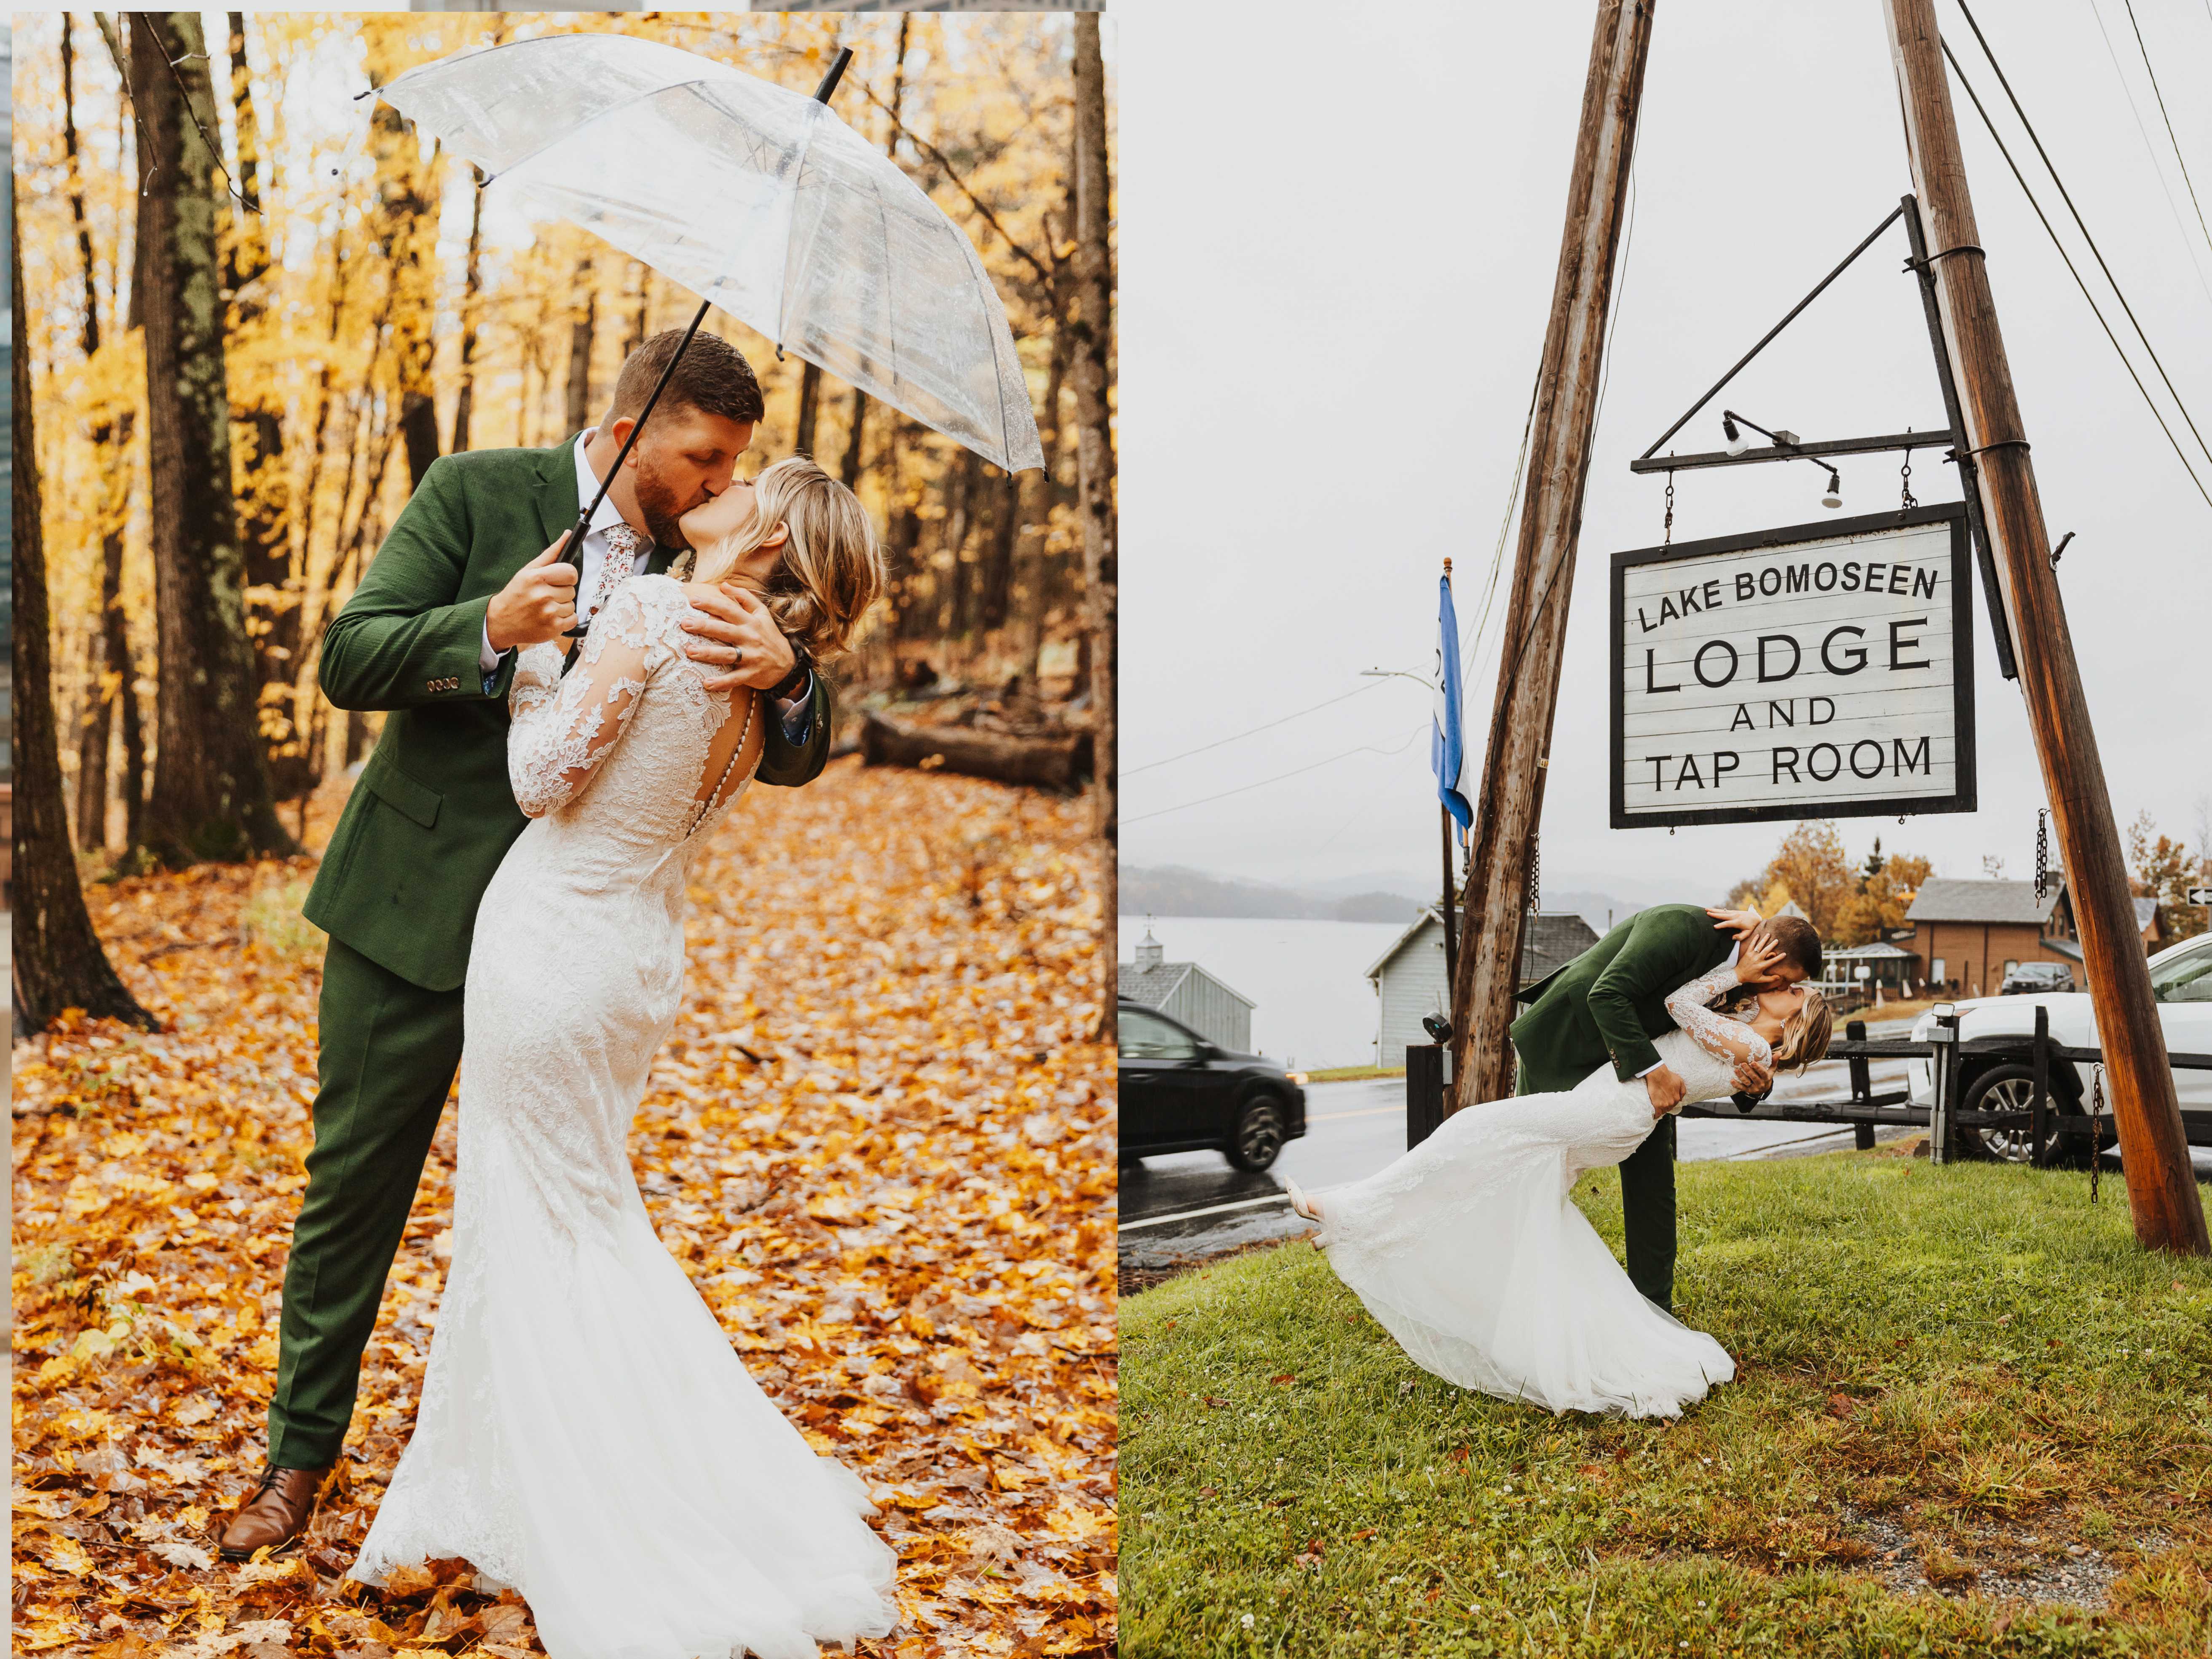 2 photos side by side, the left is of a bride and groom kissing in a forest under an umbrella, the right is of them kissing under the sign for Lake Bomoseen Lodge in Vermont